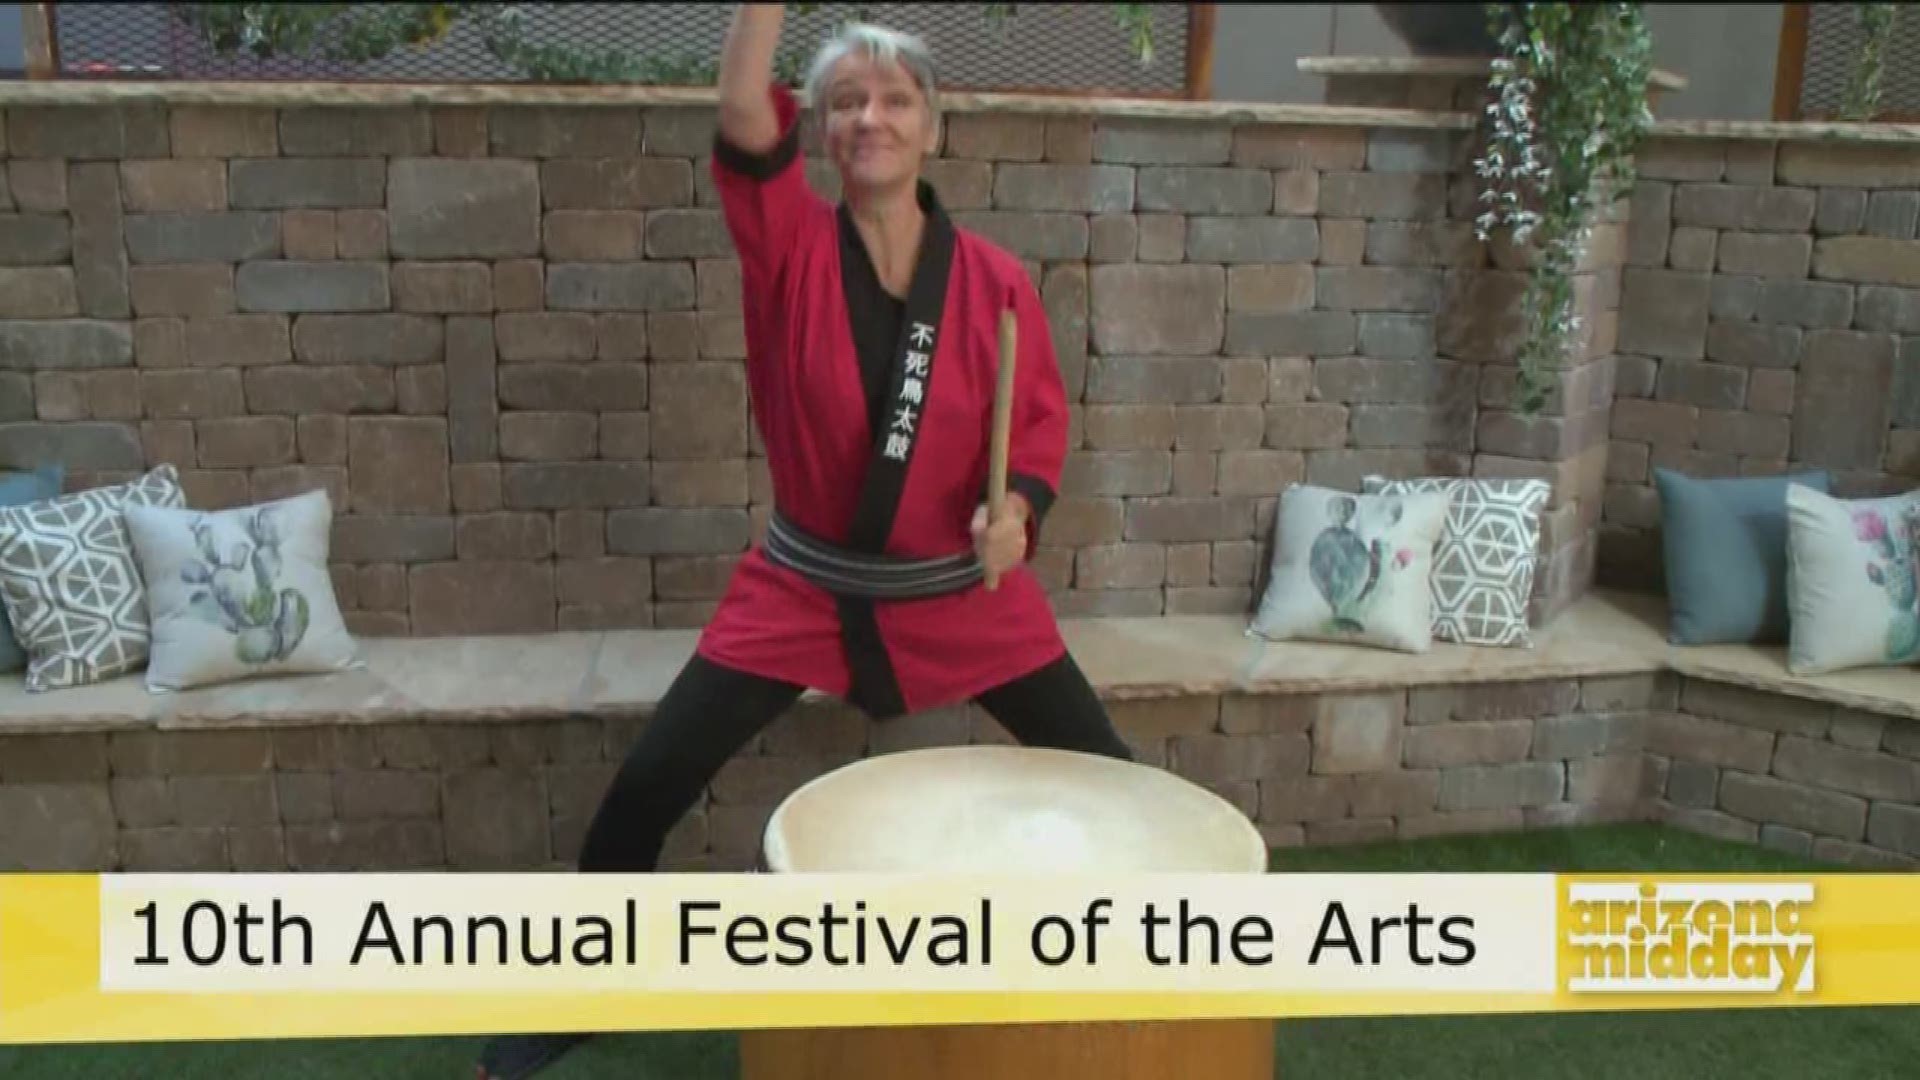 Marcia Bannon from Herberger Theatre Center tells us all the details about the this year's Festival of The Arts happening October 26th